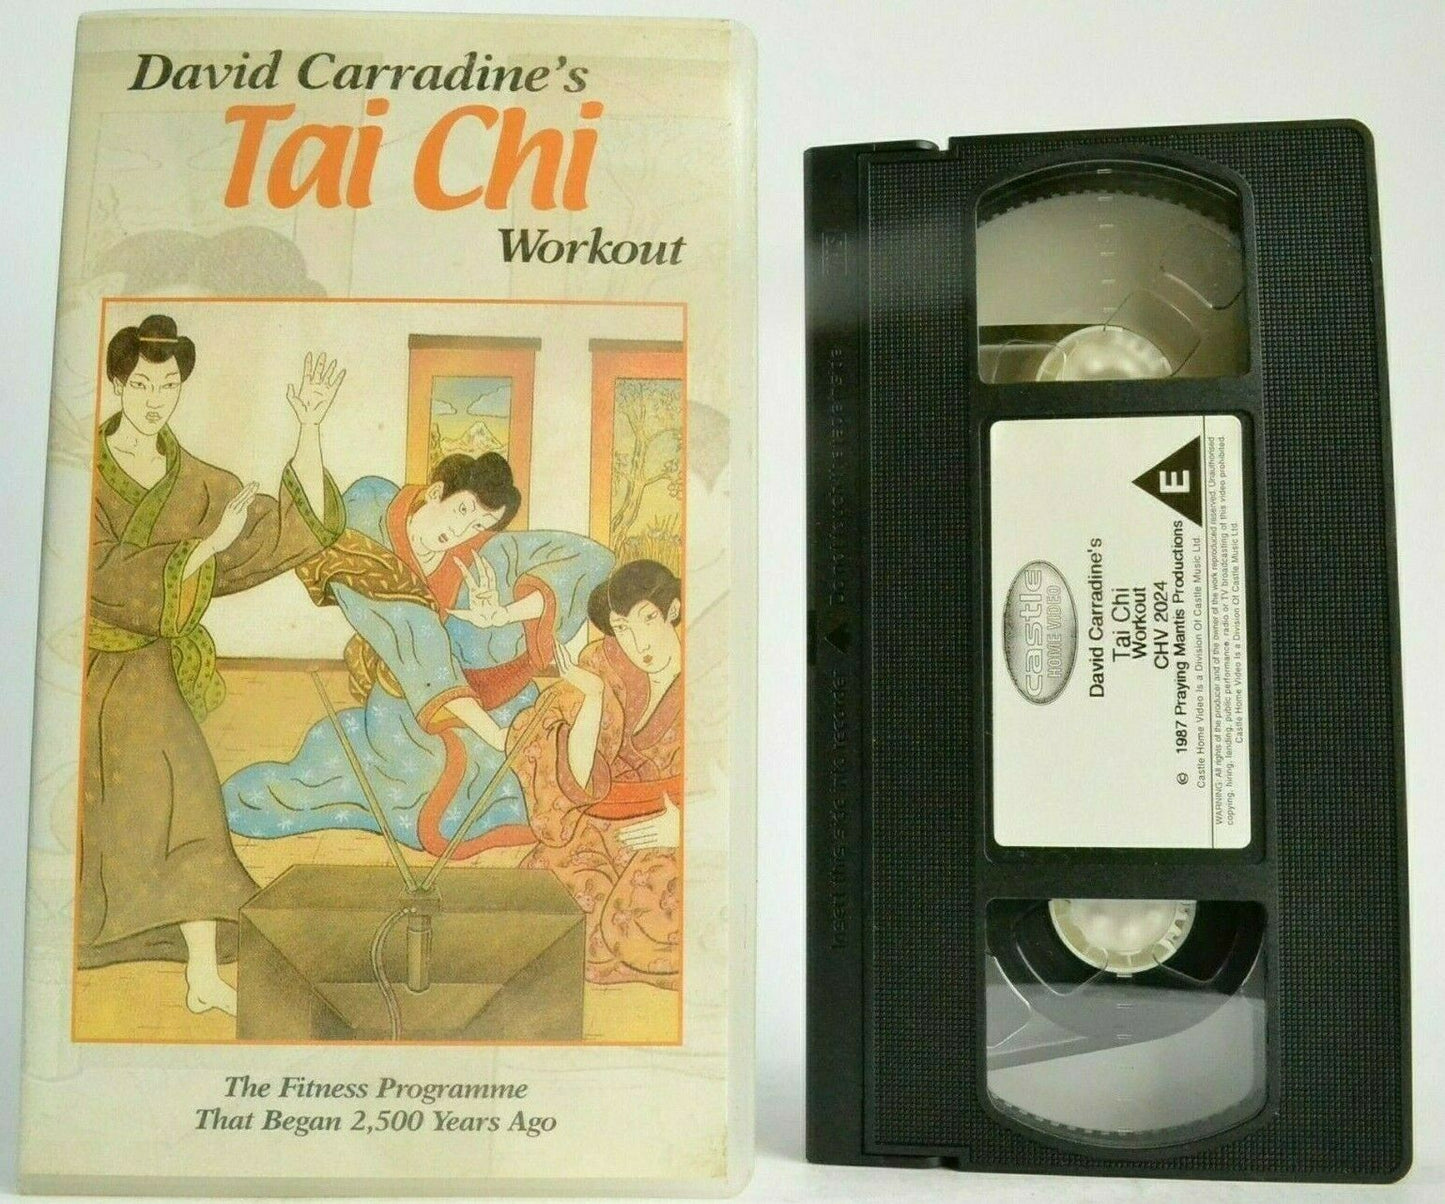 Tai Chi Workout [David Carradine] Fitness Programme - Important Tips - Pal VHS-